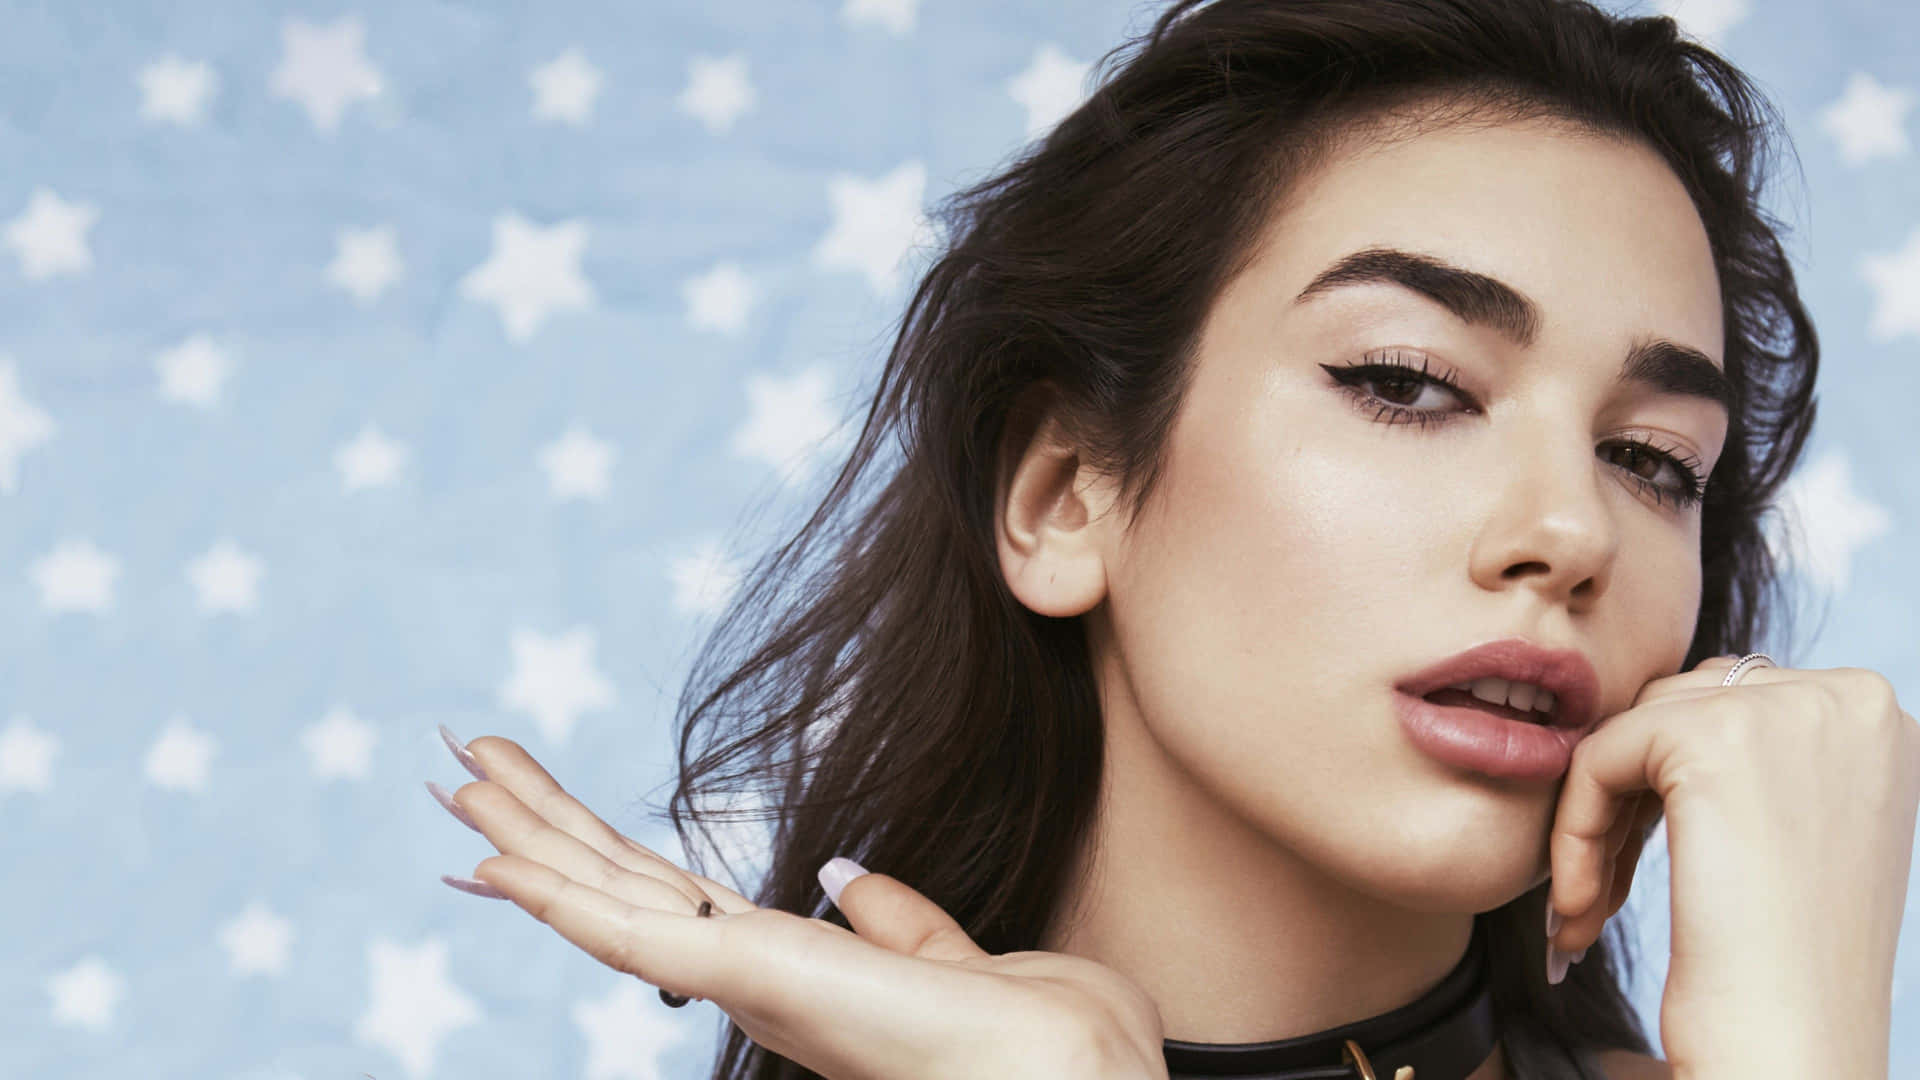 Dua Lipa striking a pose on stage during a live performance